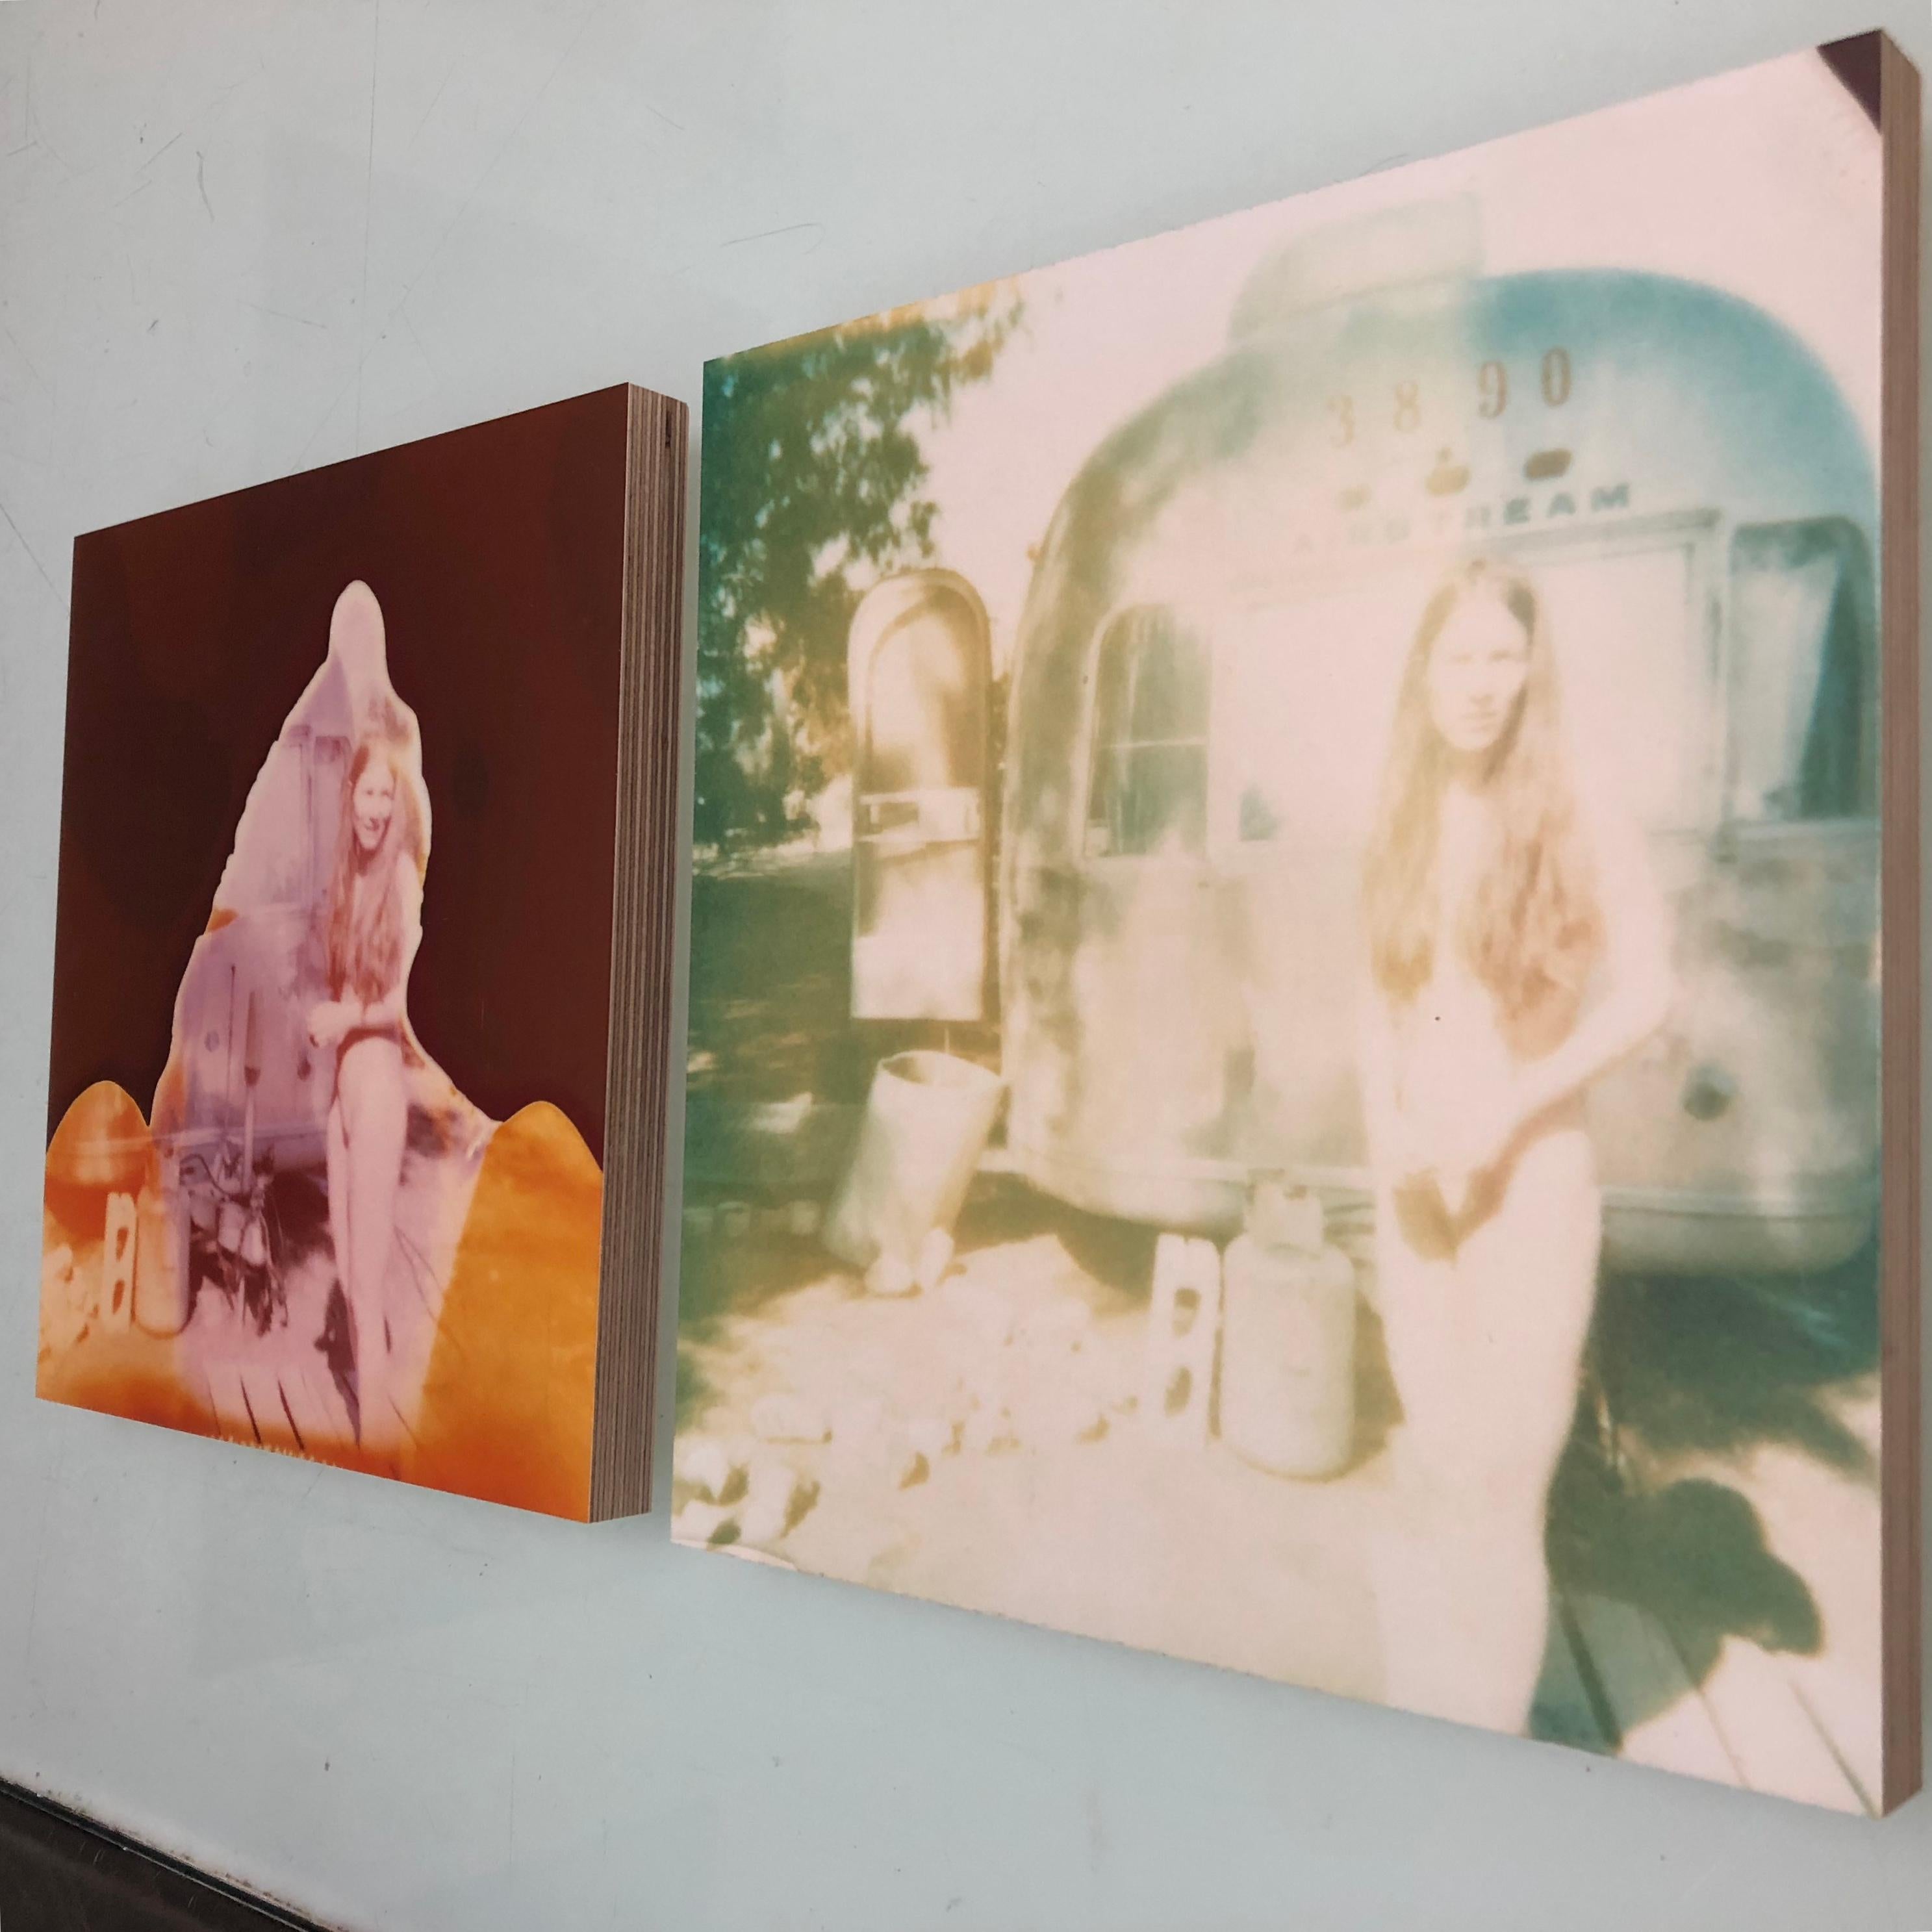 In front of Trailer (Sidewinder), diptych - Polaroid, Nude, Contemporary, Analog 3